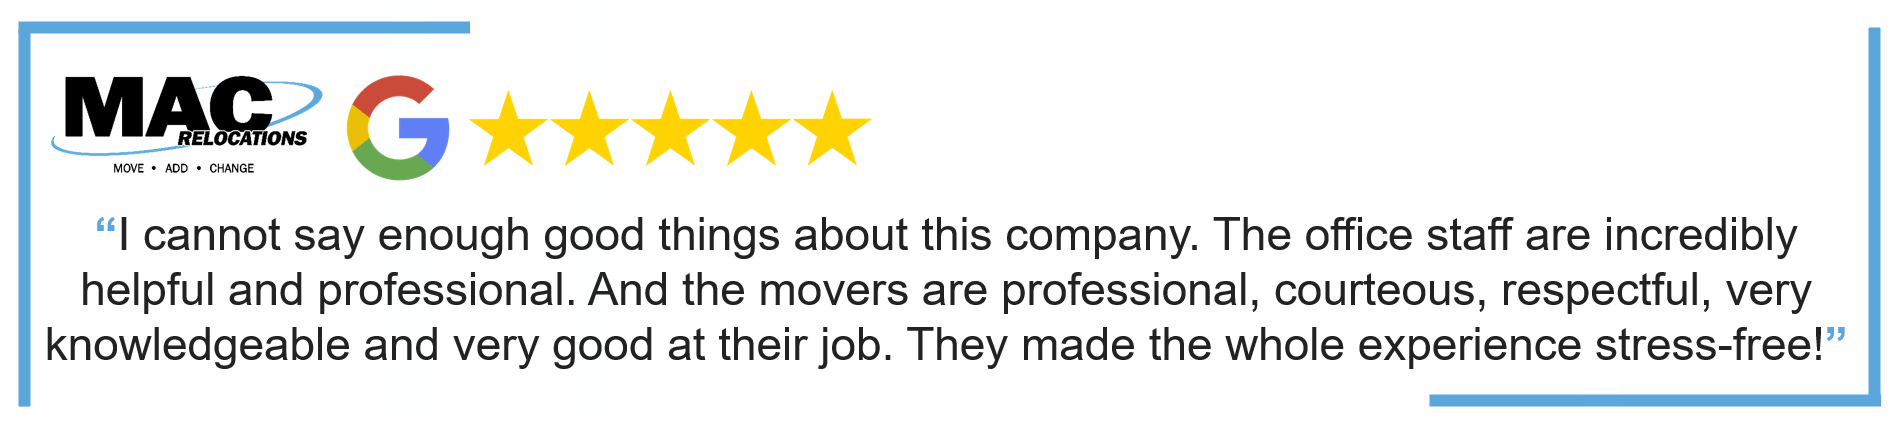 Chicago Office Movers